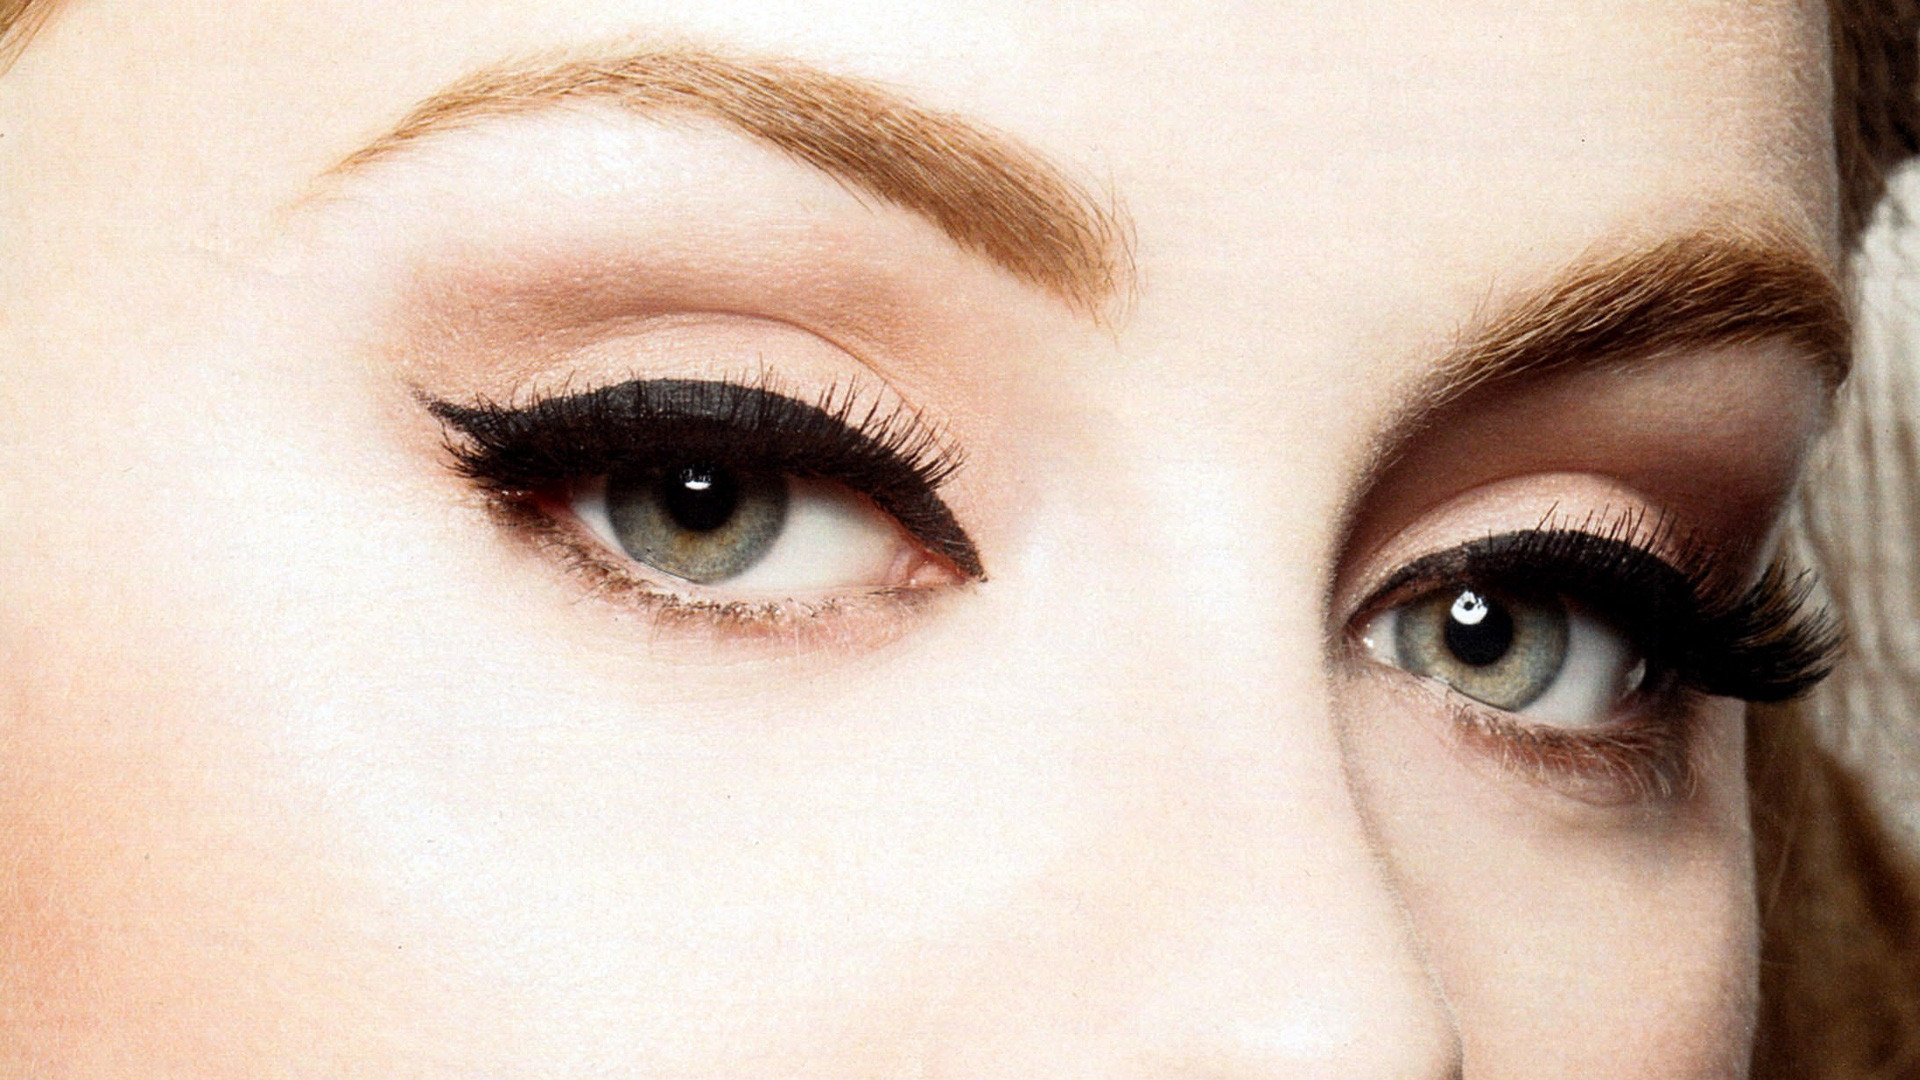 Adele Close Up Face for 1920 x 1080 HDTV 1080p resolution